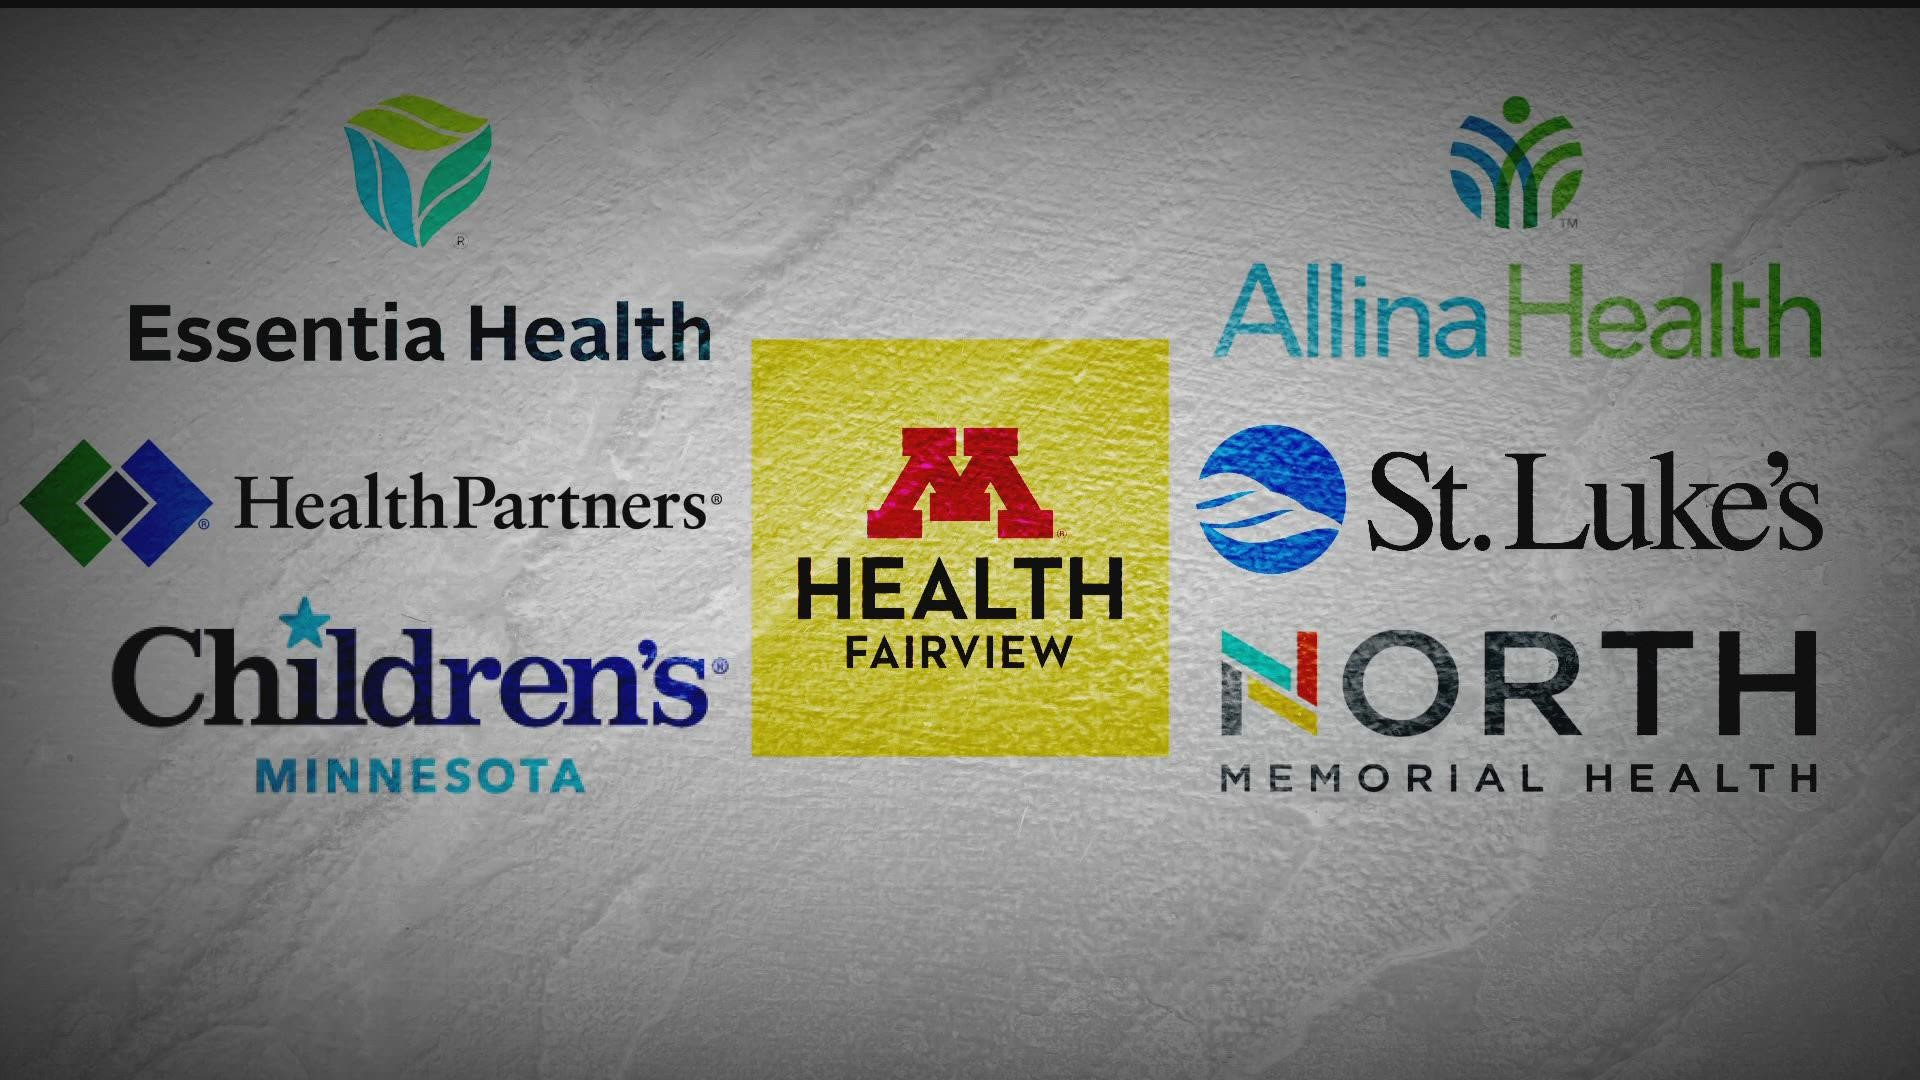 With 15,000 health care workers going on strike, the next trip to the hospital Minnesotans take may look different during the strike.